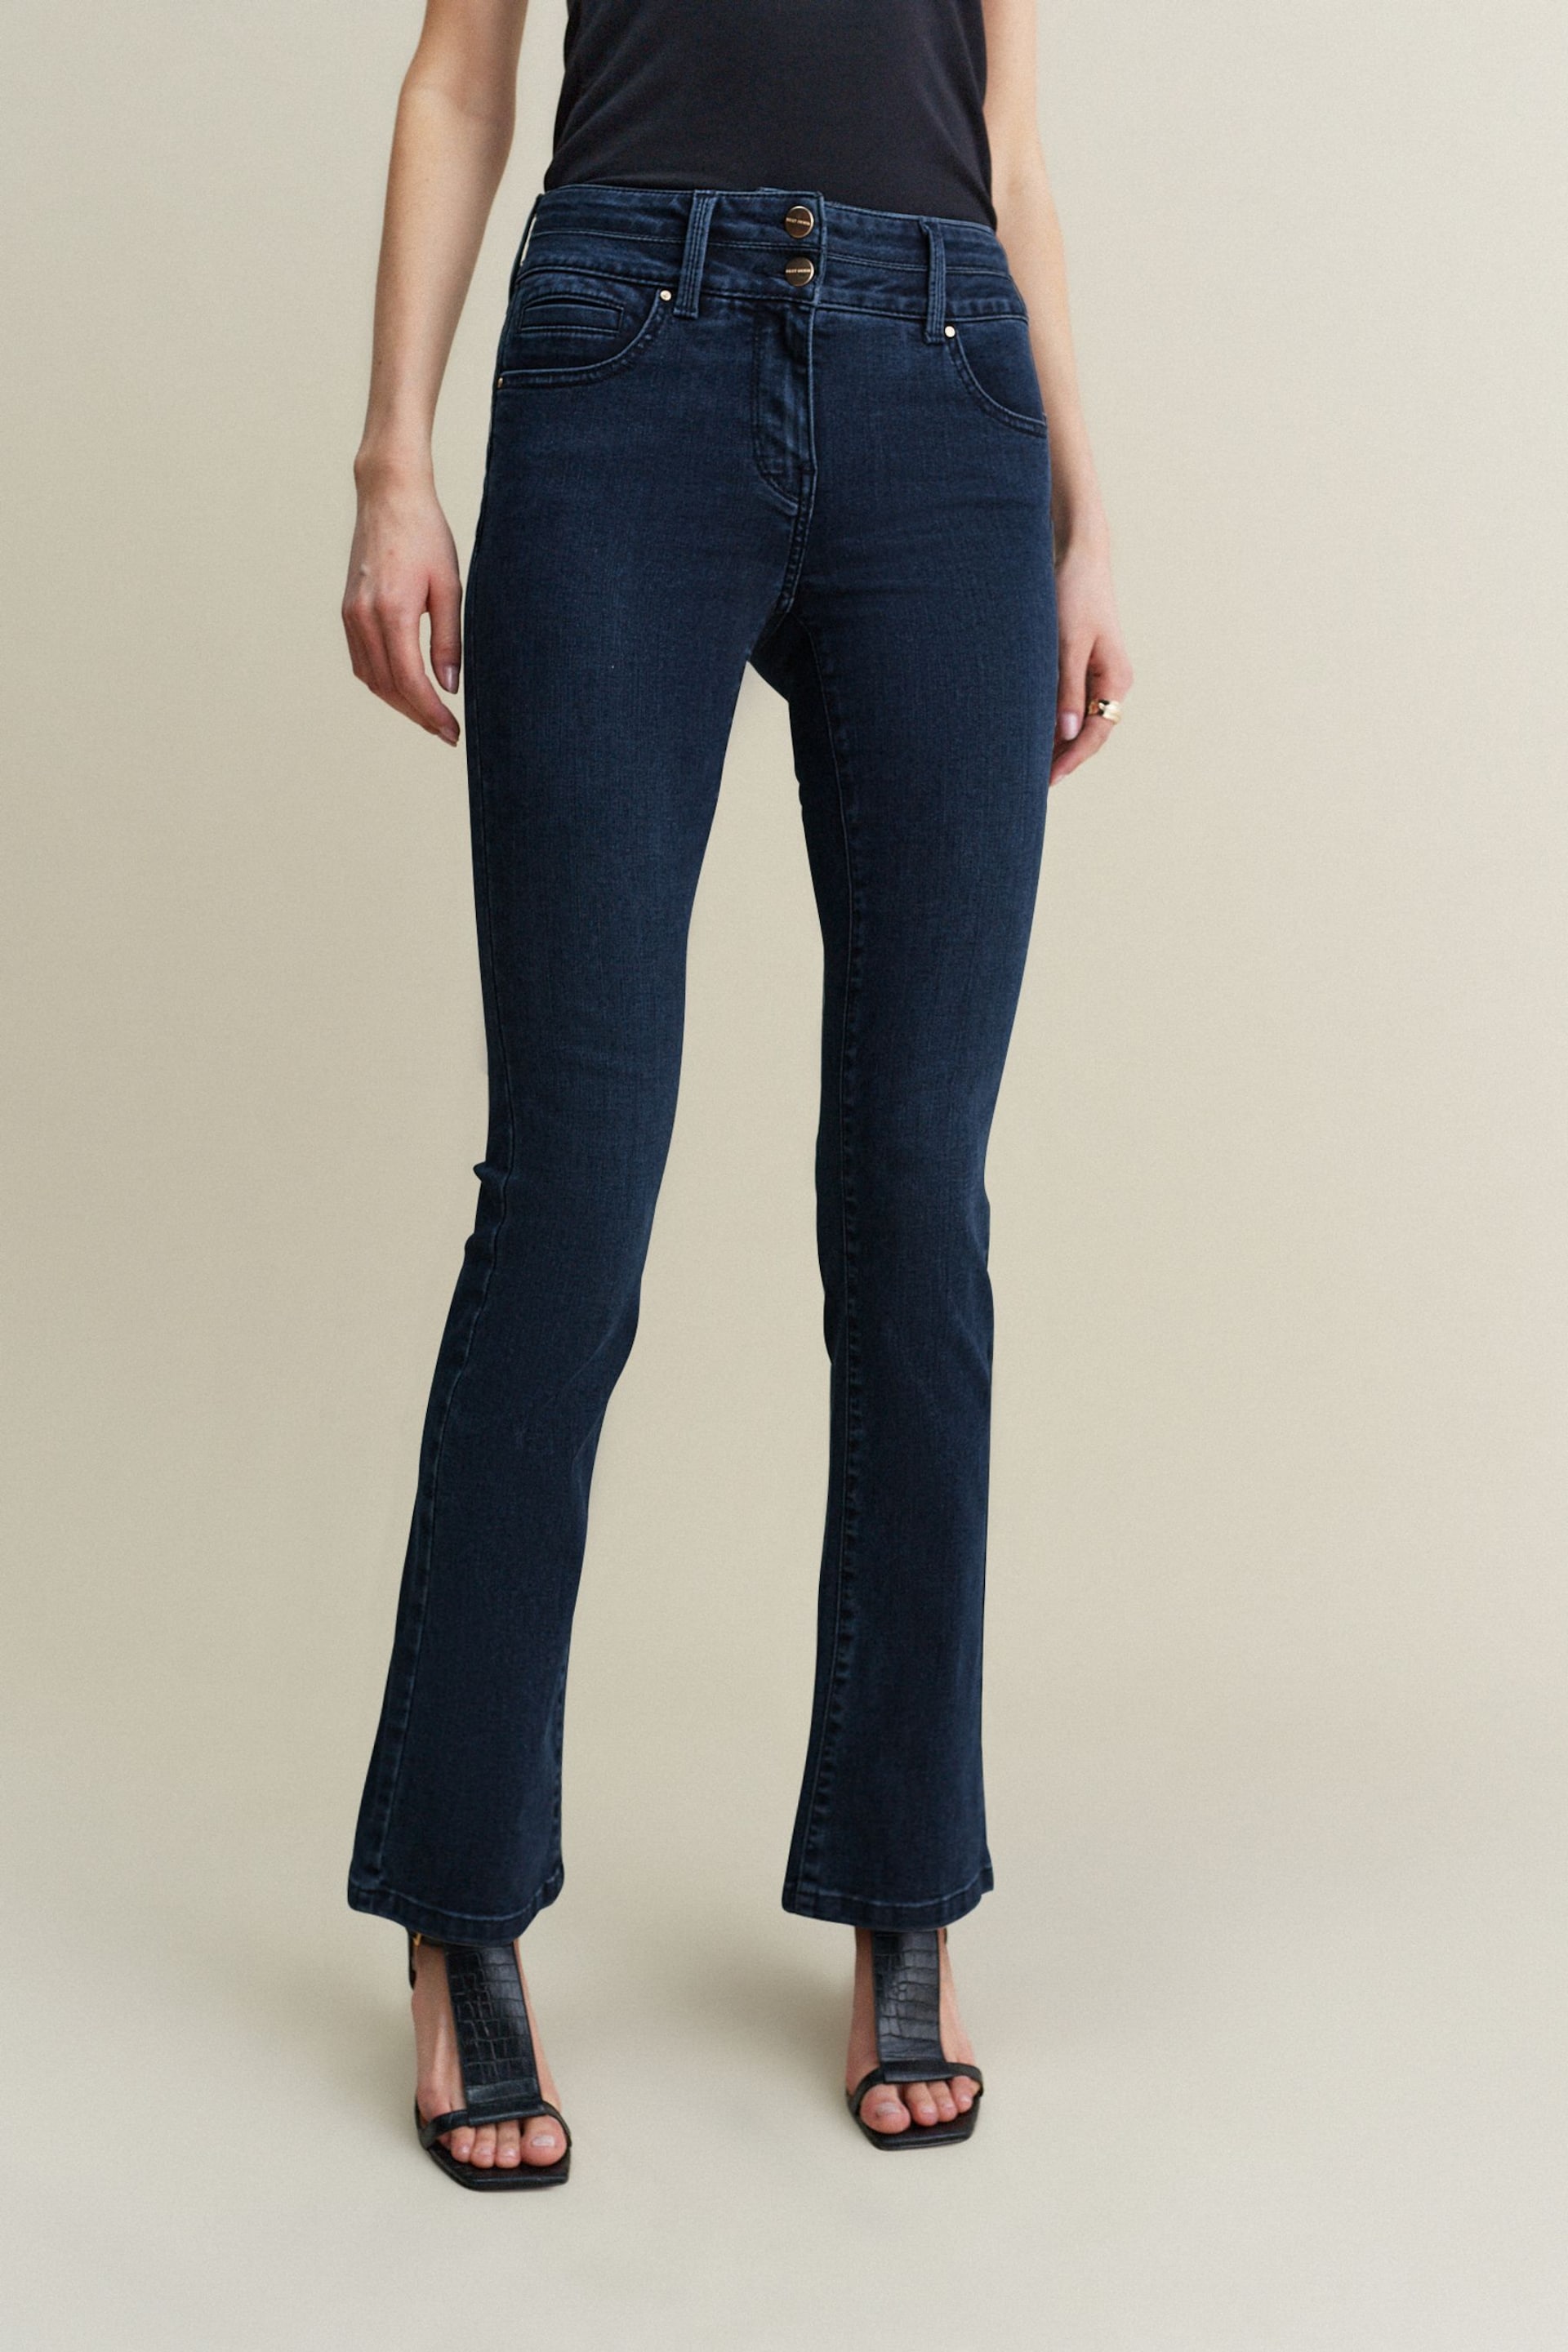 Inky Blue Denim Slim Lift And Shape Bootcut Jeans - Image 4 of 7